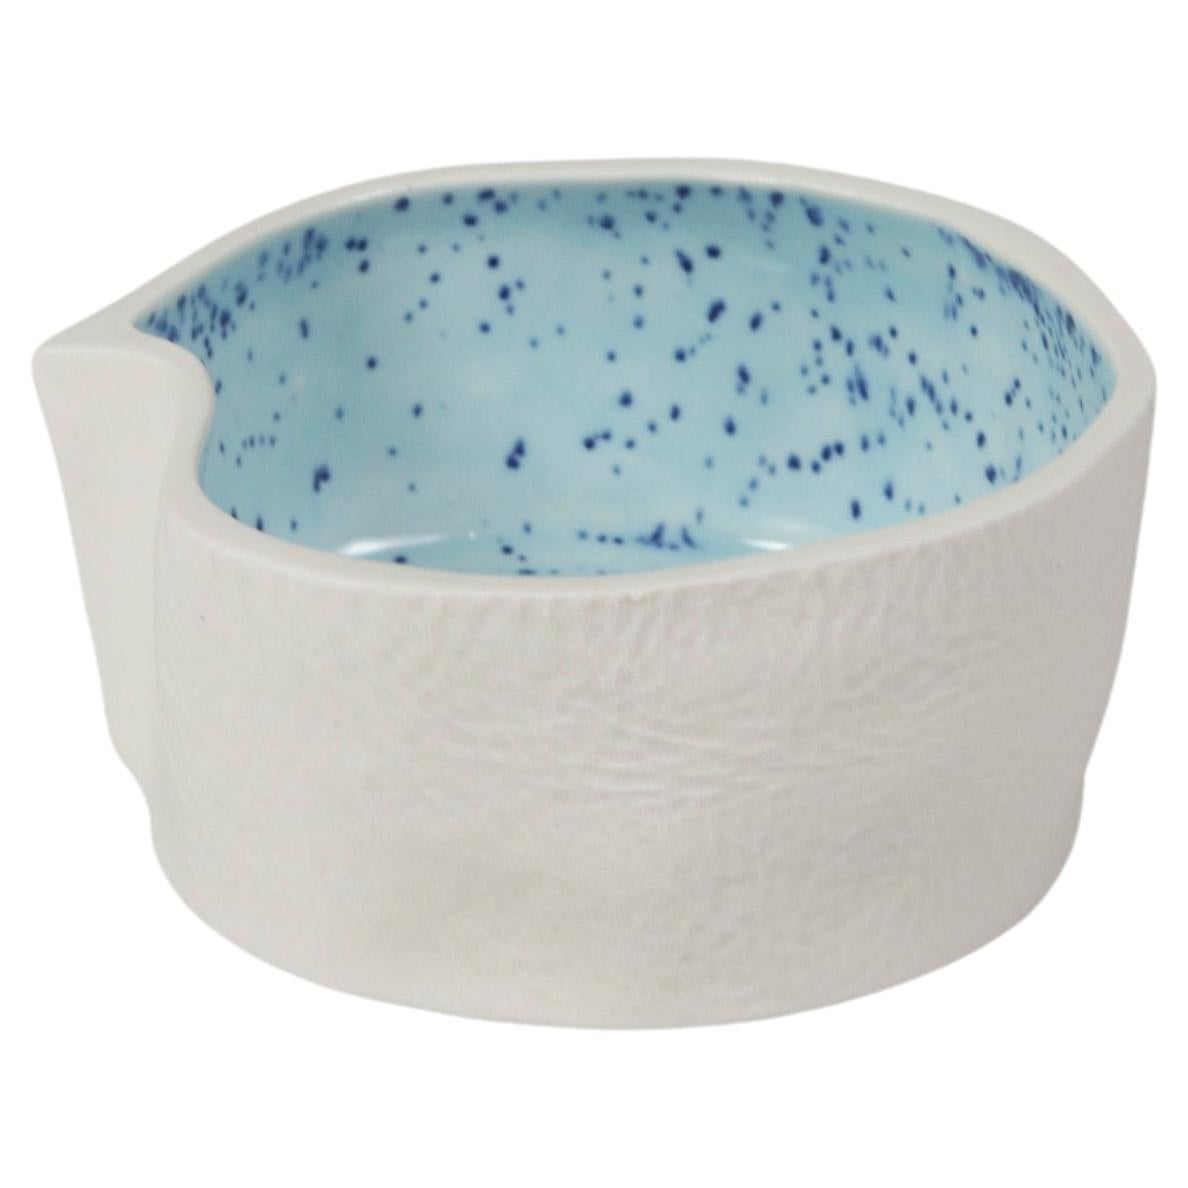 White & Light Blue Small Ceramic Kawa Dish, Textured Porcelain Catchall Bowl For Sale